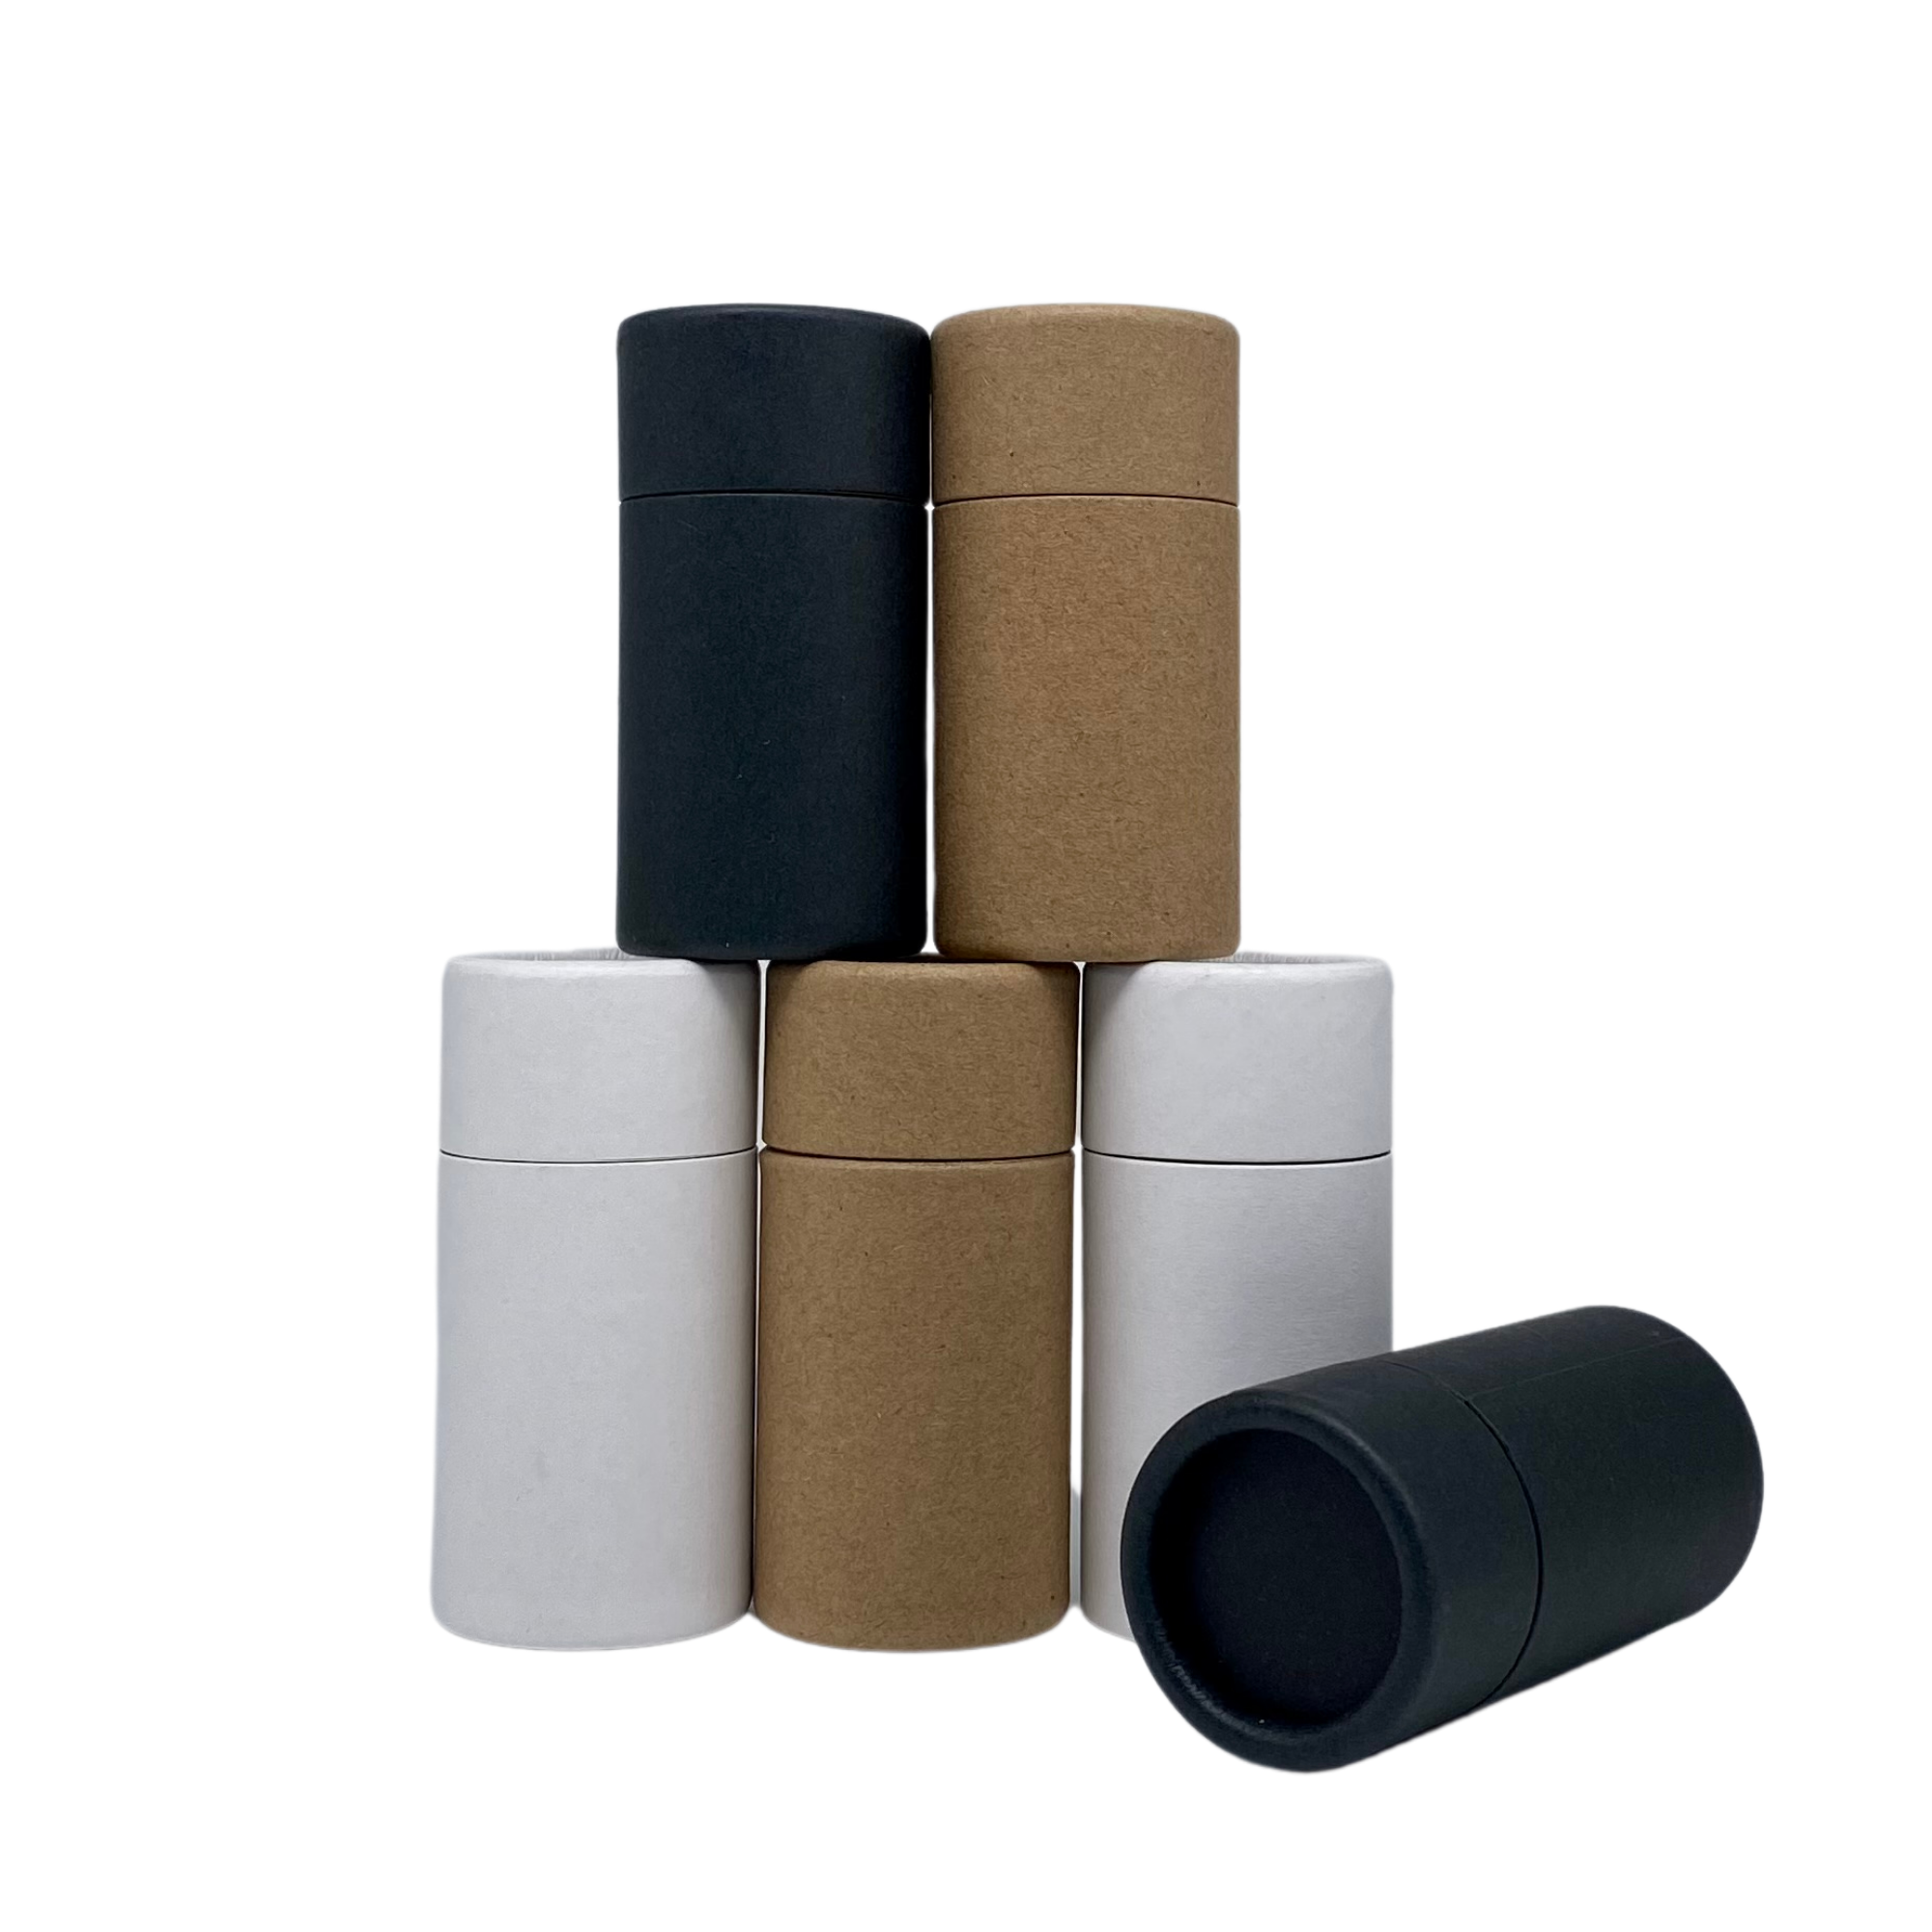 2 ounce / 60 g Push-up Paper Tube – GreenWay Containers